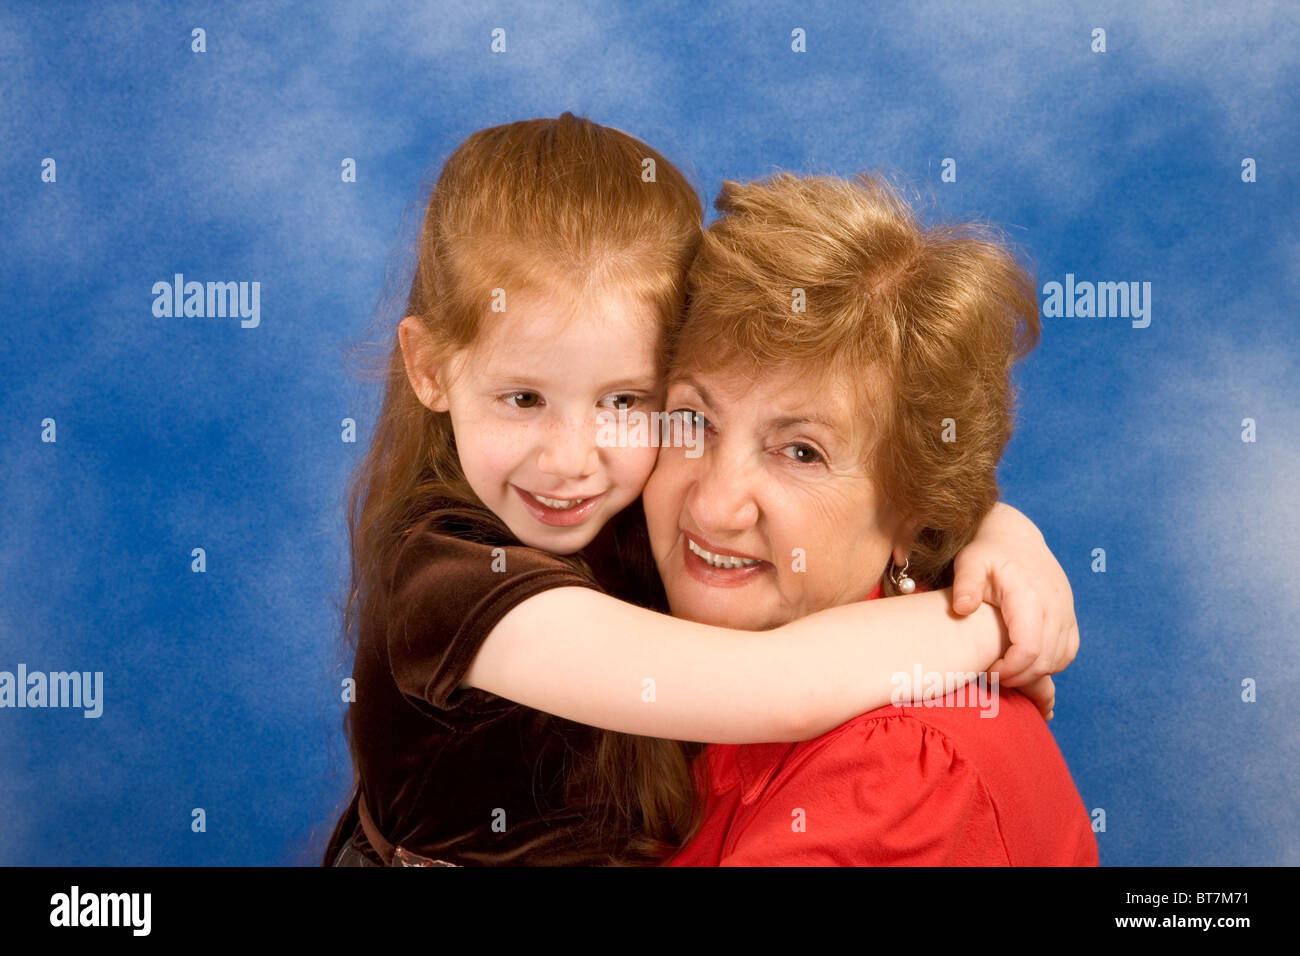 Portrait of grandmother hugging six year old girl smiling and happy Stock Photo